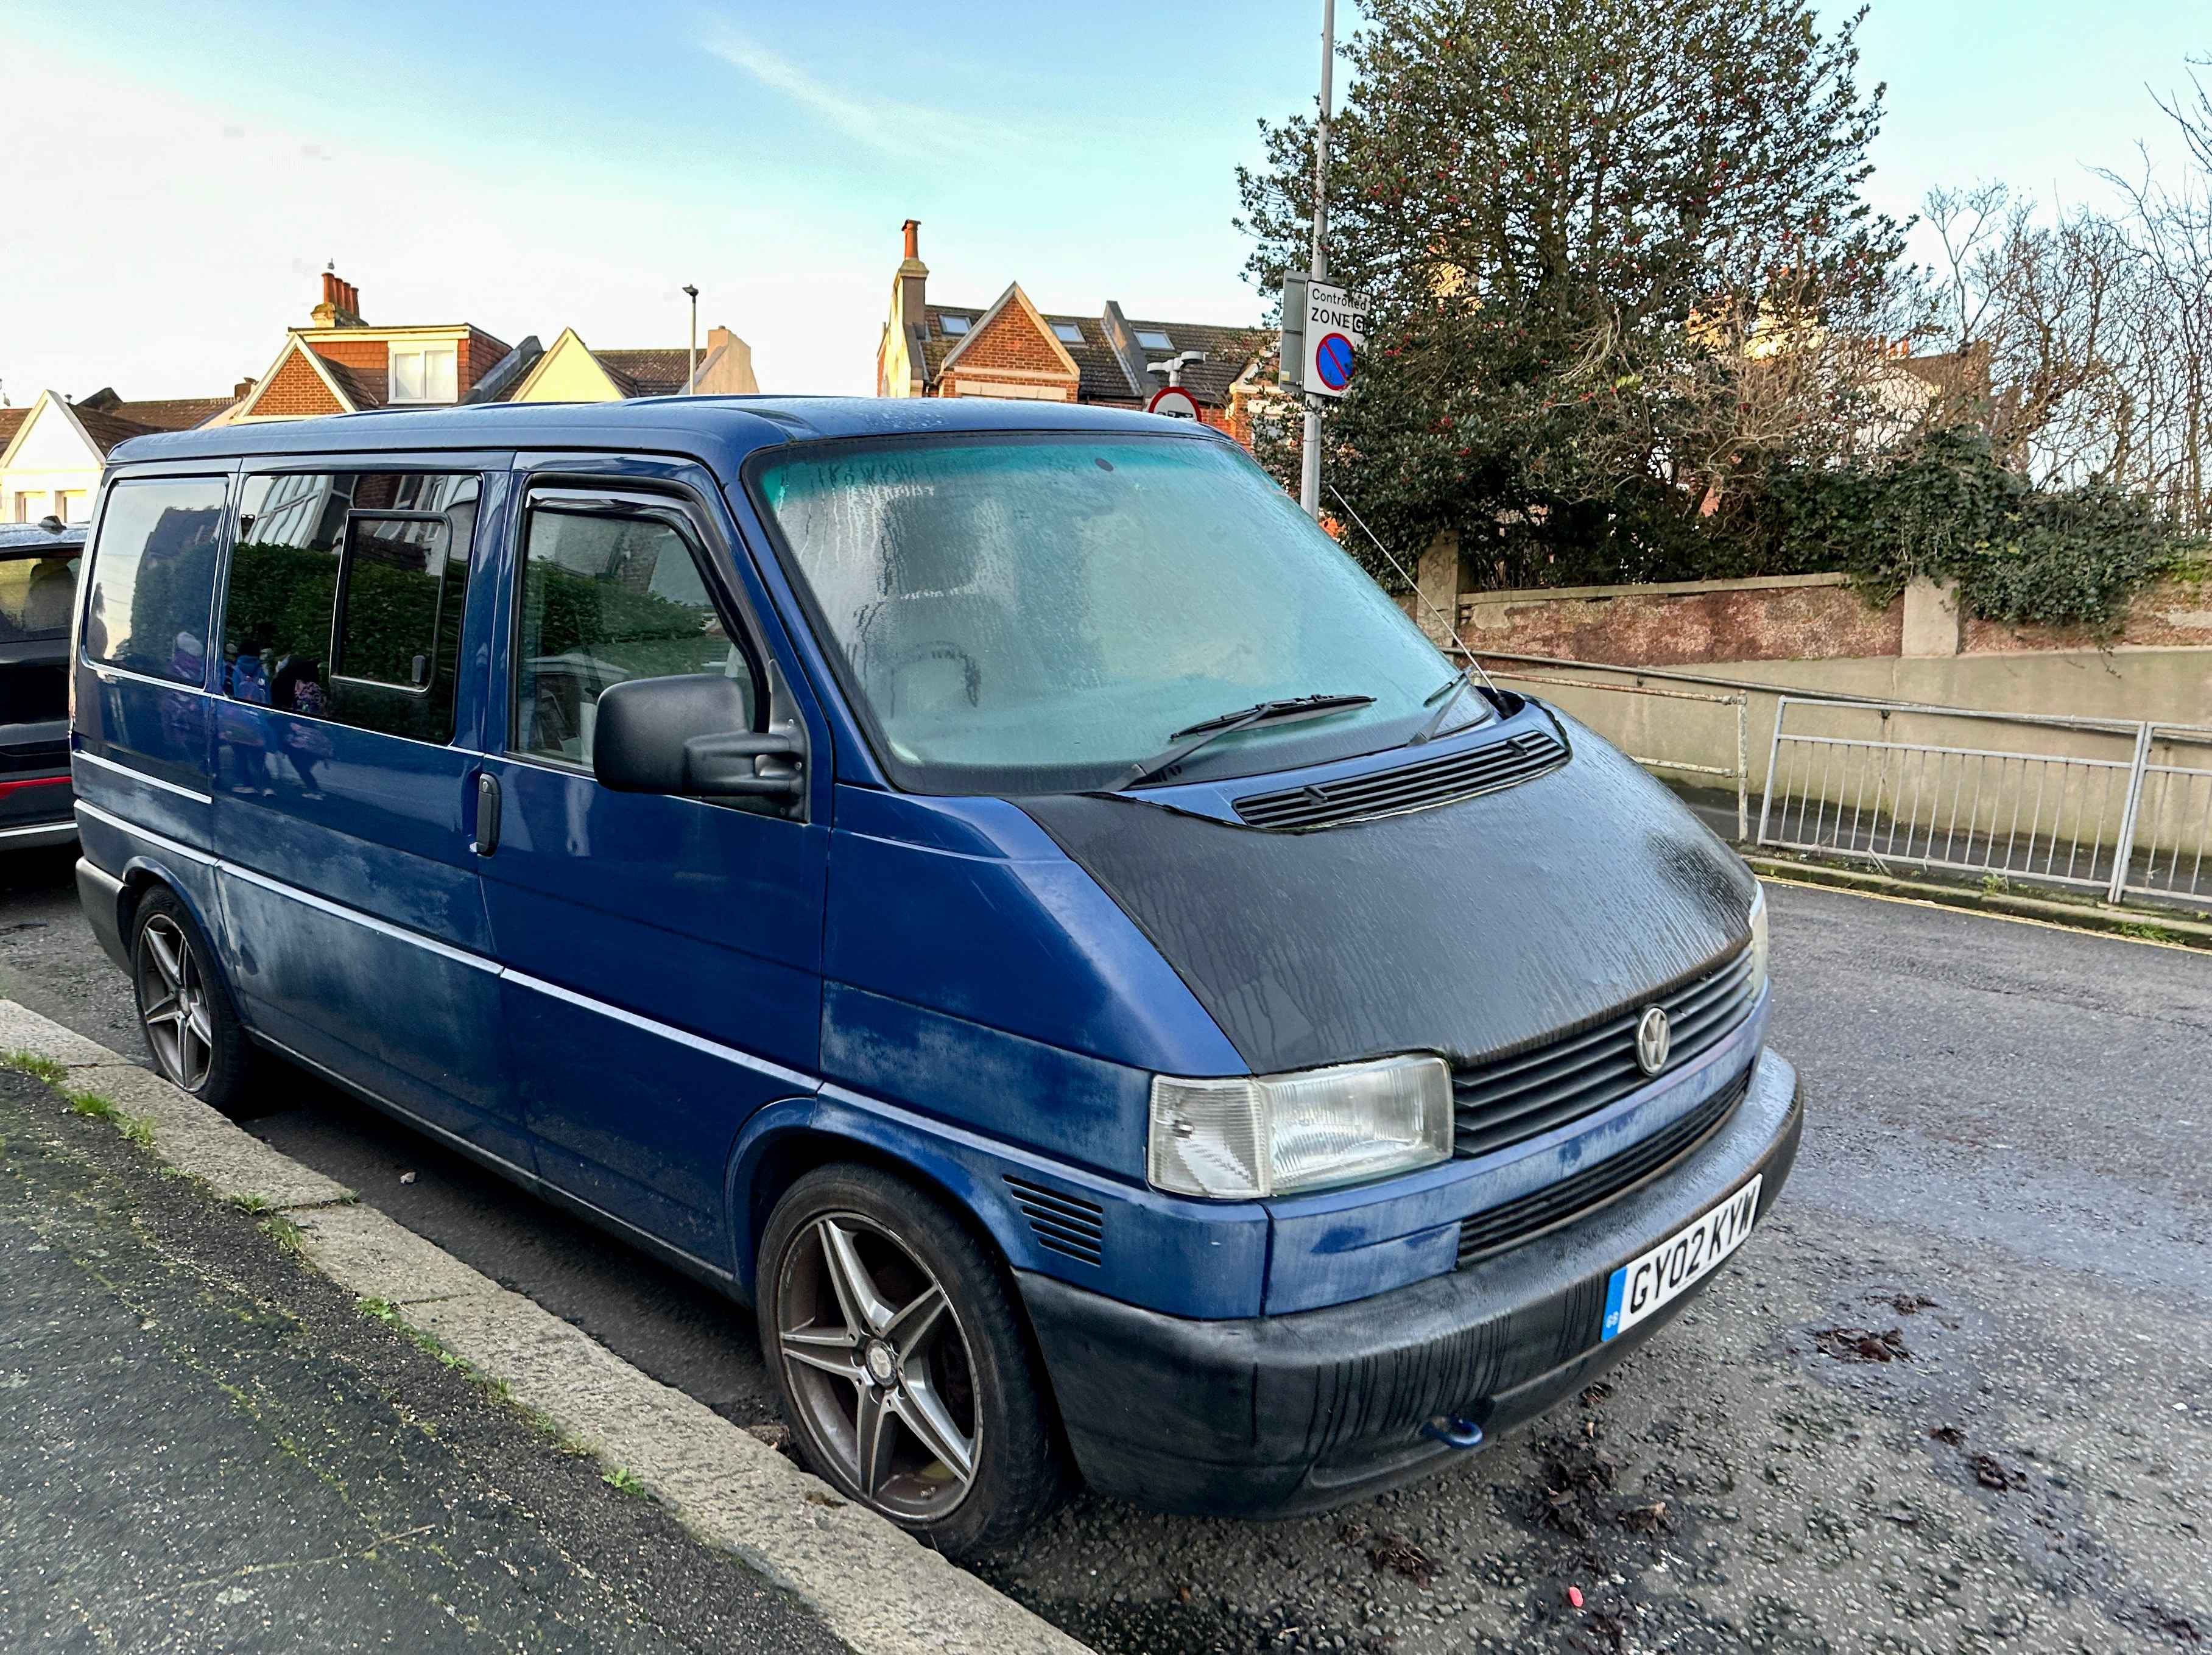 Photograph of GY02 KYW - a Blue Volkswagen Transporter camper van parked in Hollingdean by a non-resident. The eighteenth of eighteen photographs supplied by the residents of Hollingdean.